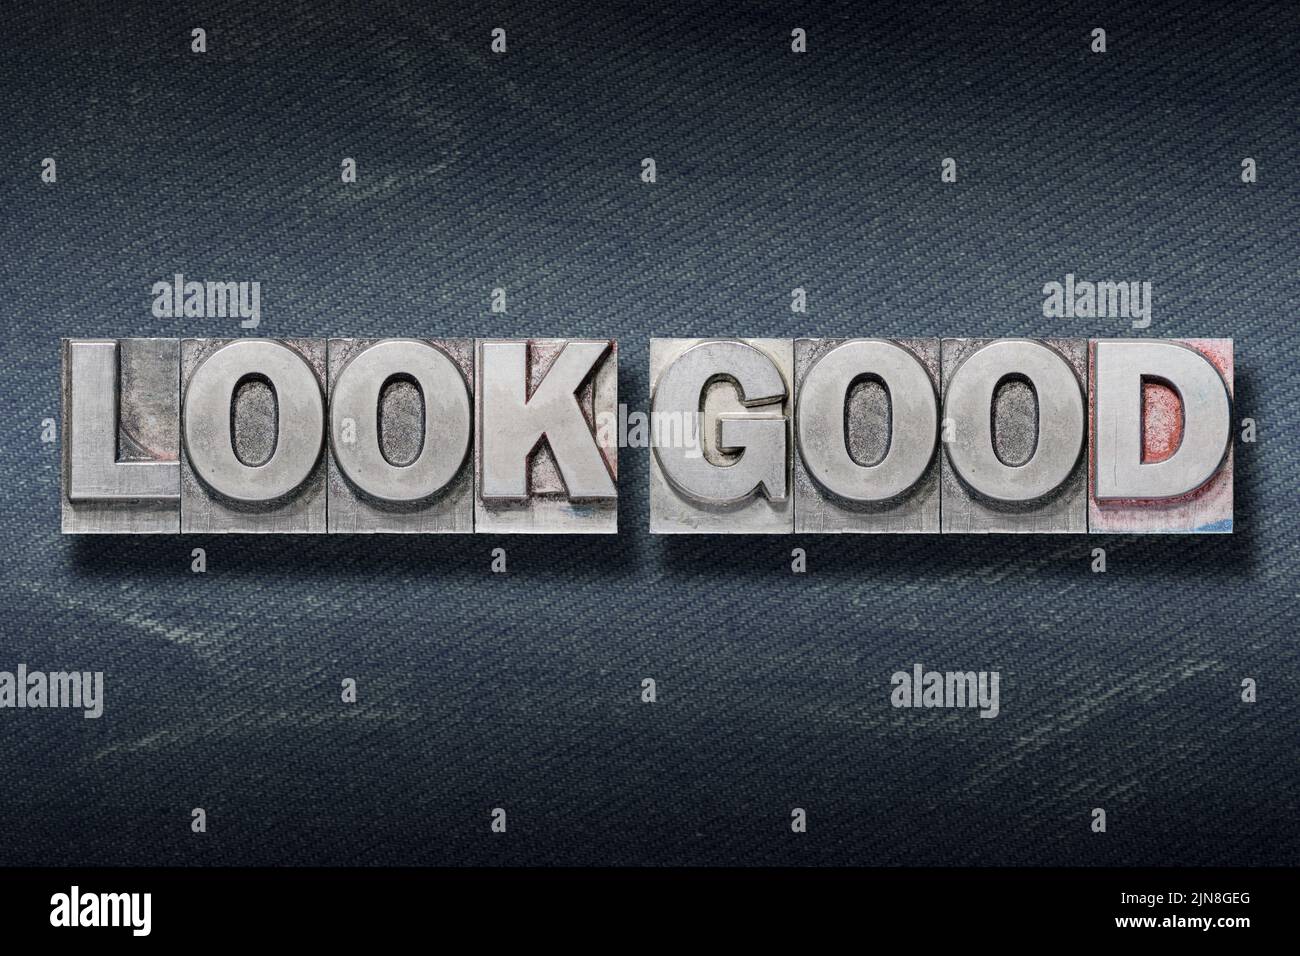 look good phrase made from metallic letterpress on dark jeans background Stock Photo